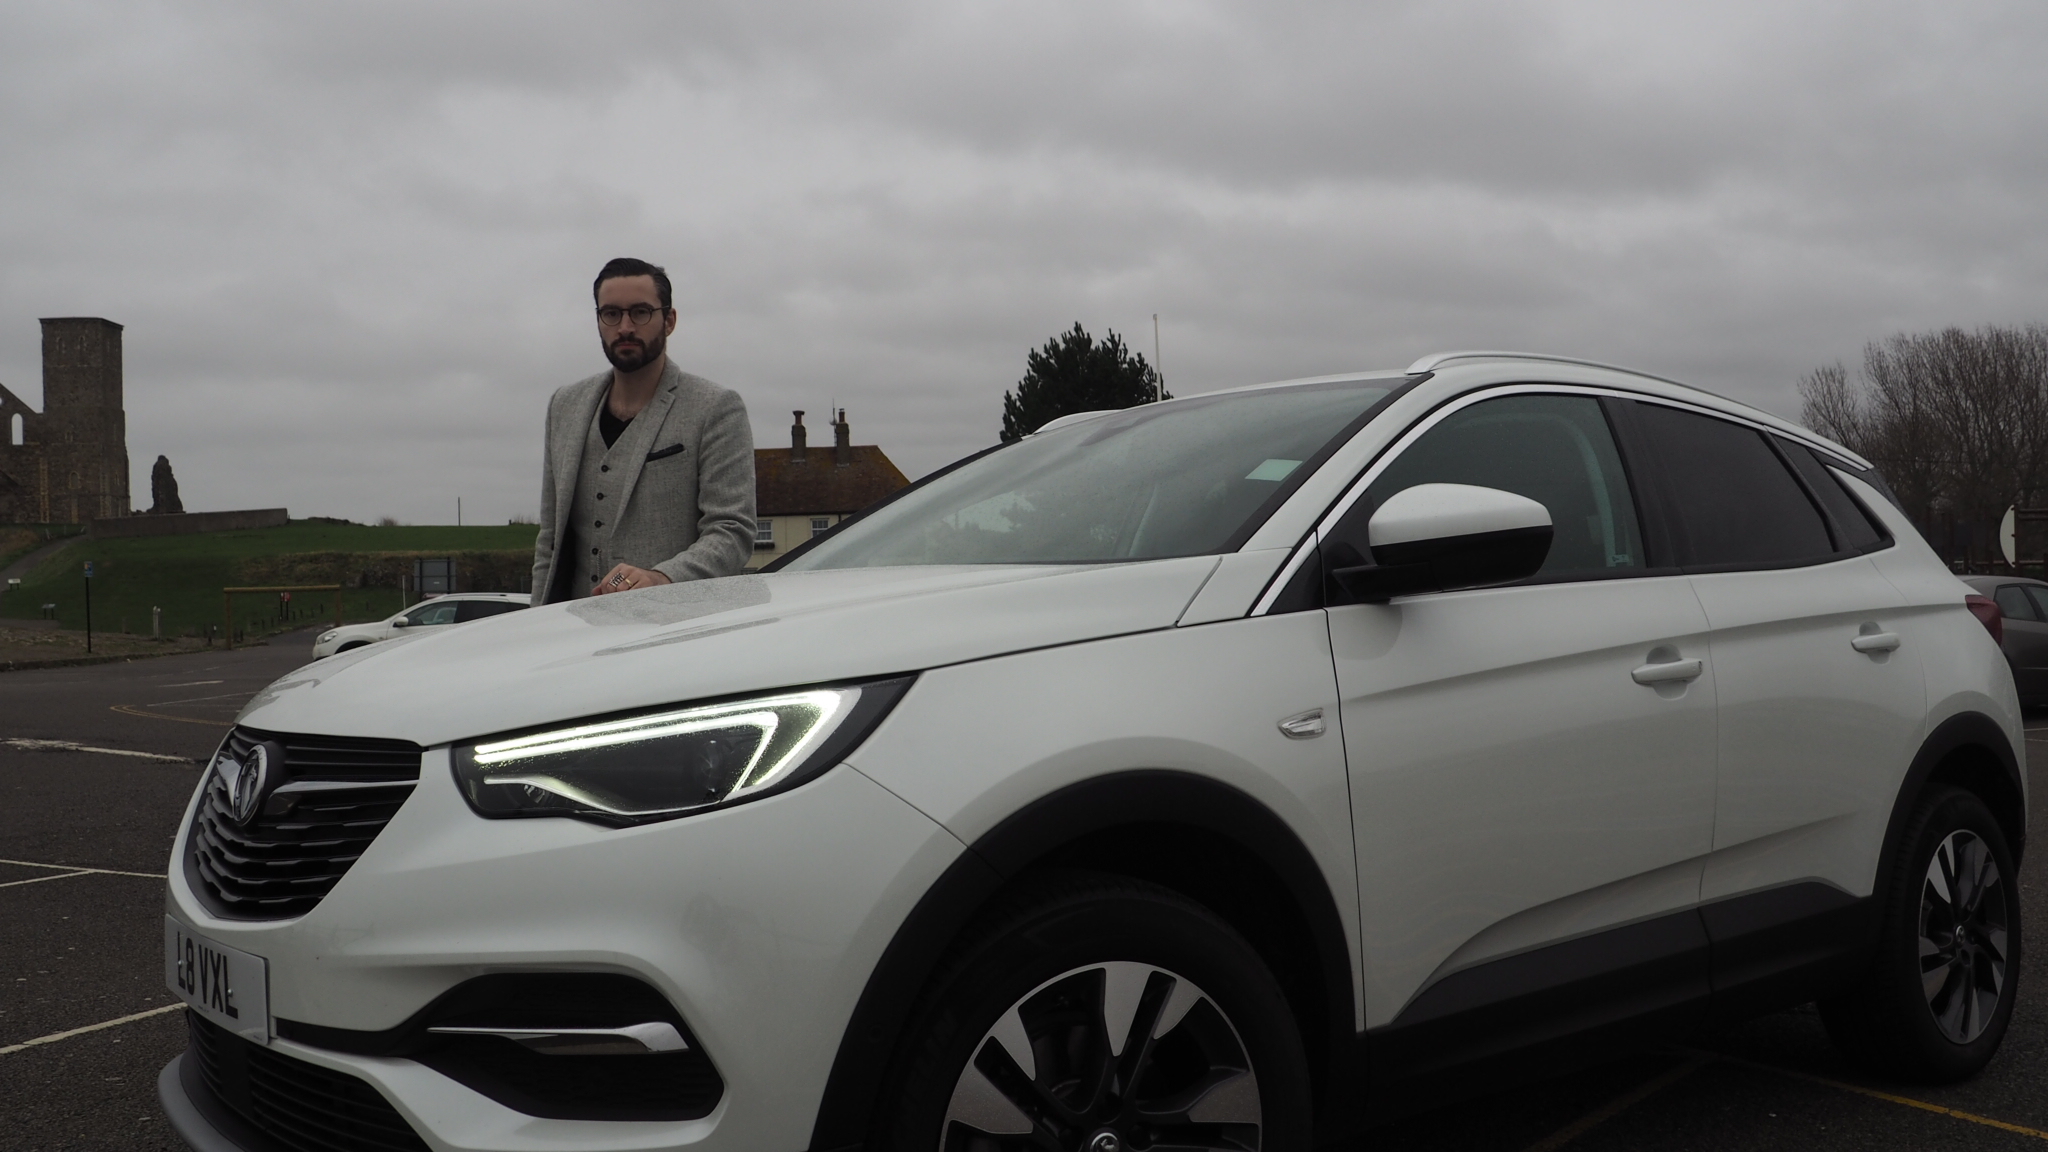 Vauxhall Grandland X is Just a Little More Grand